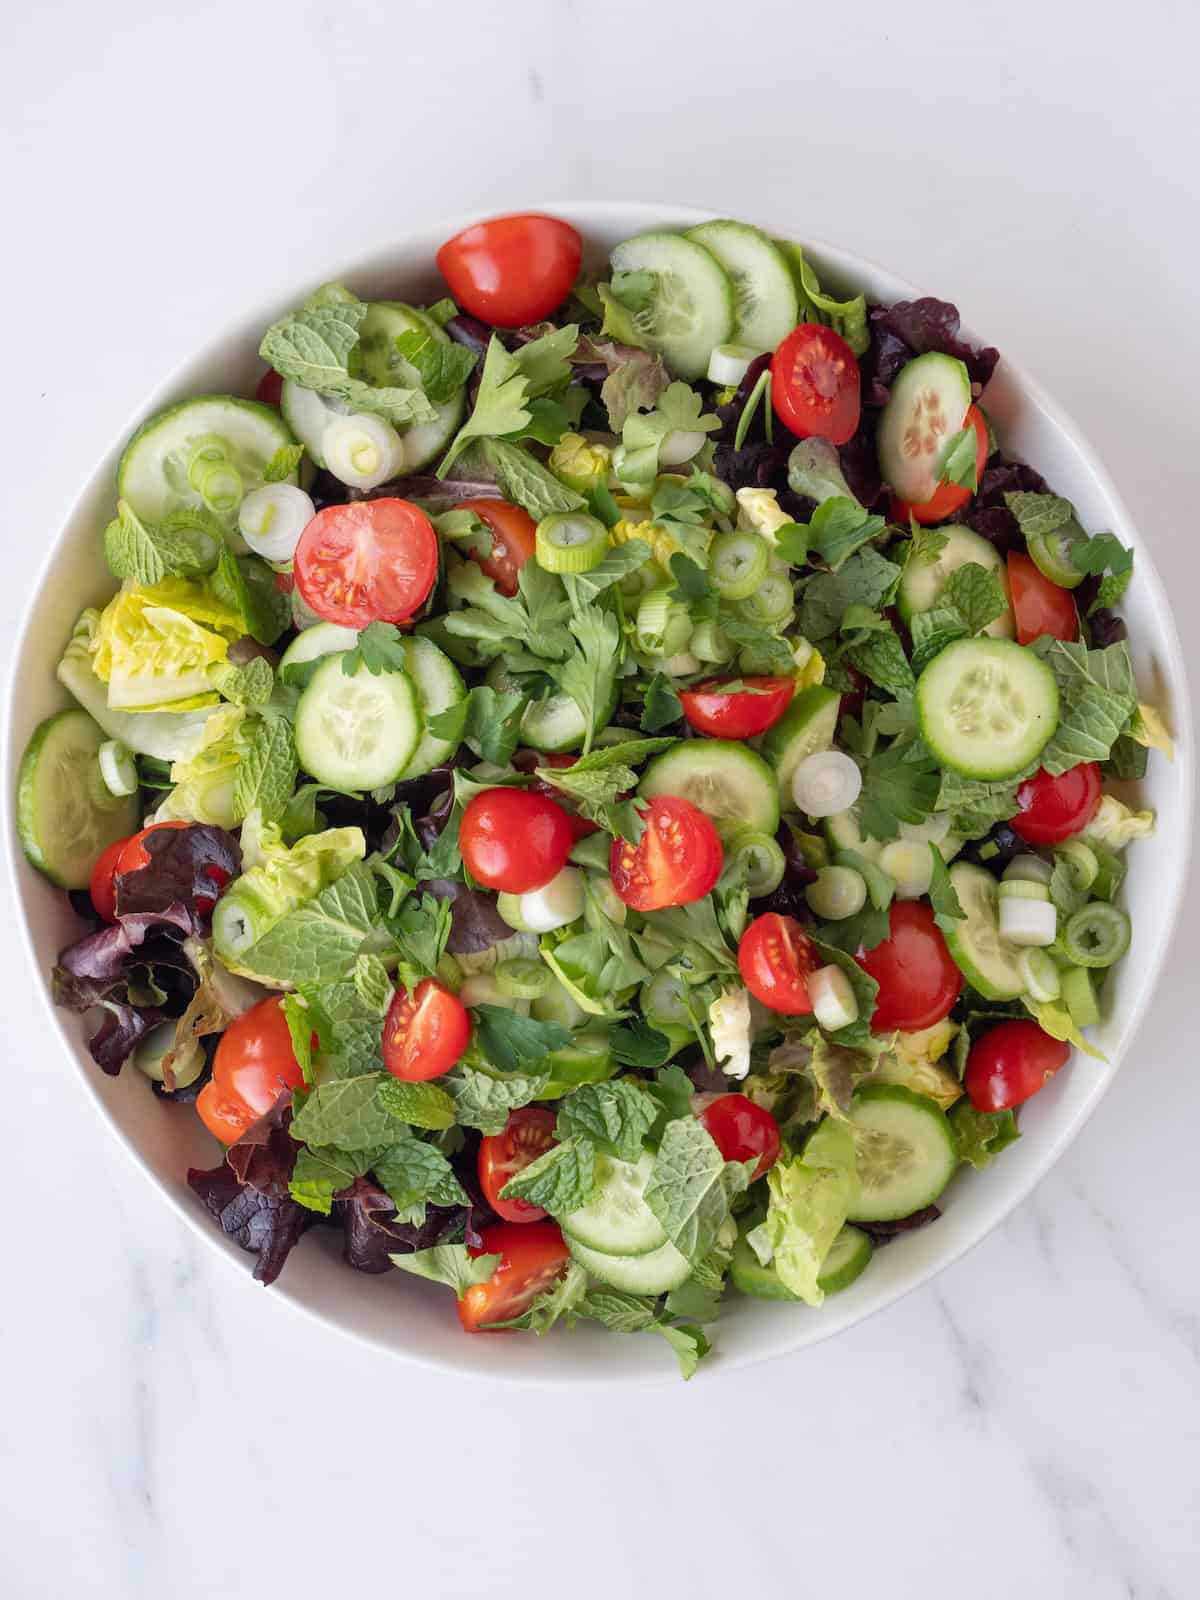 A bowl with chopped lettuce, green onions, tomatoes, cucumber, mint, and parsley.